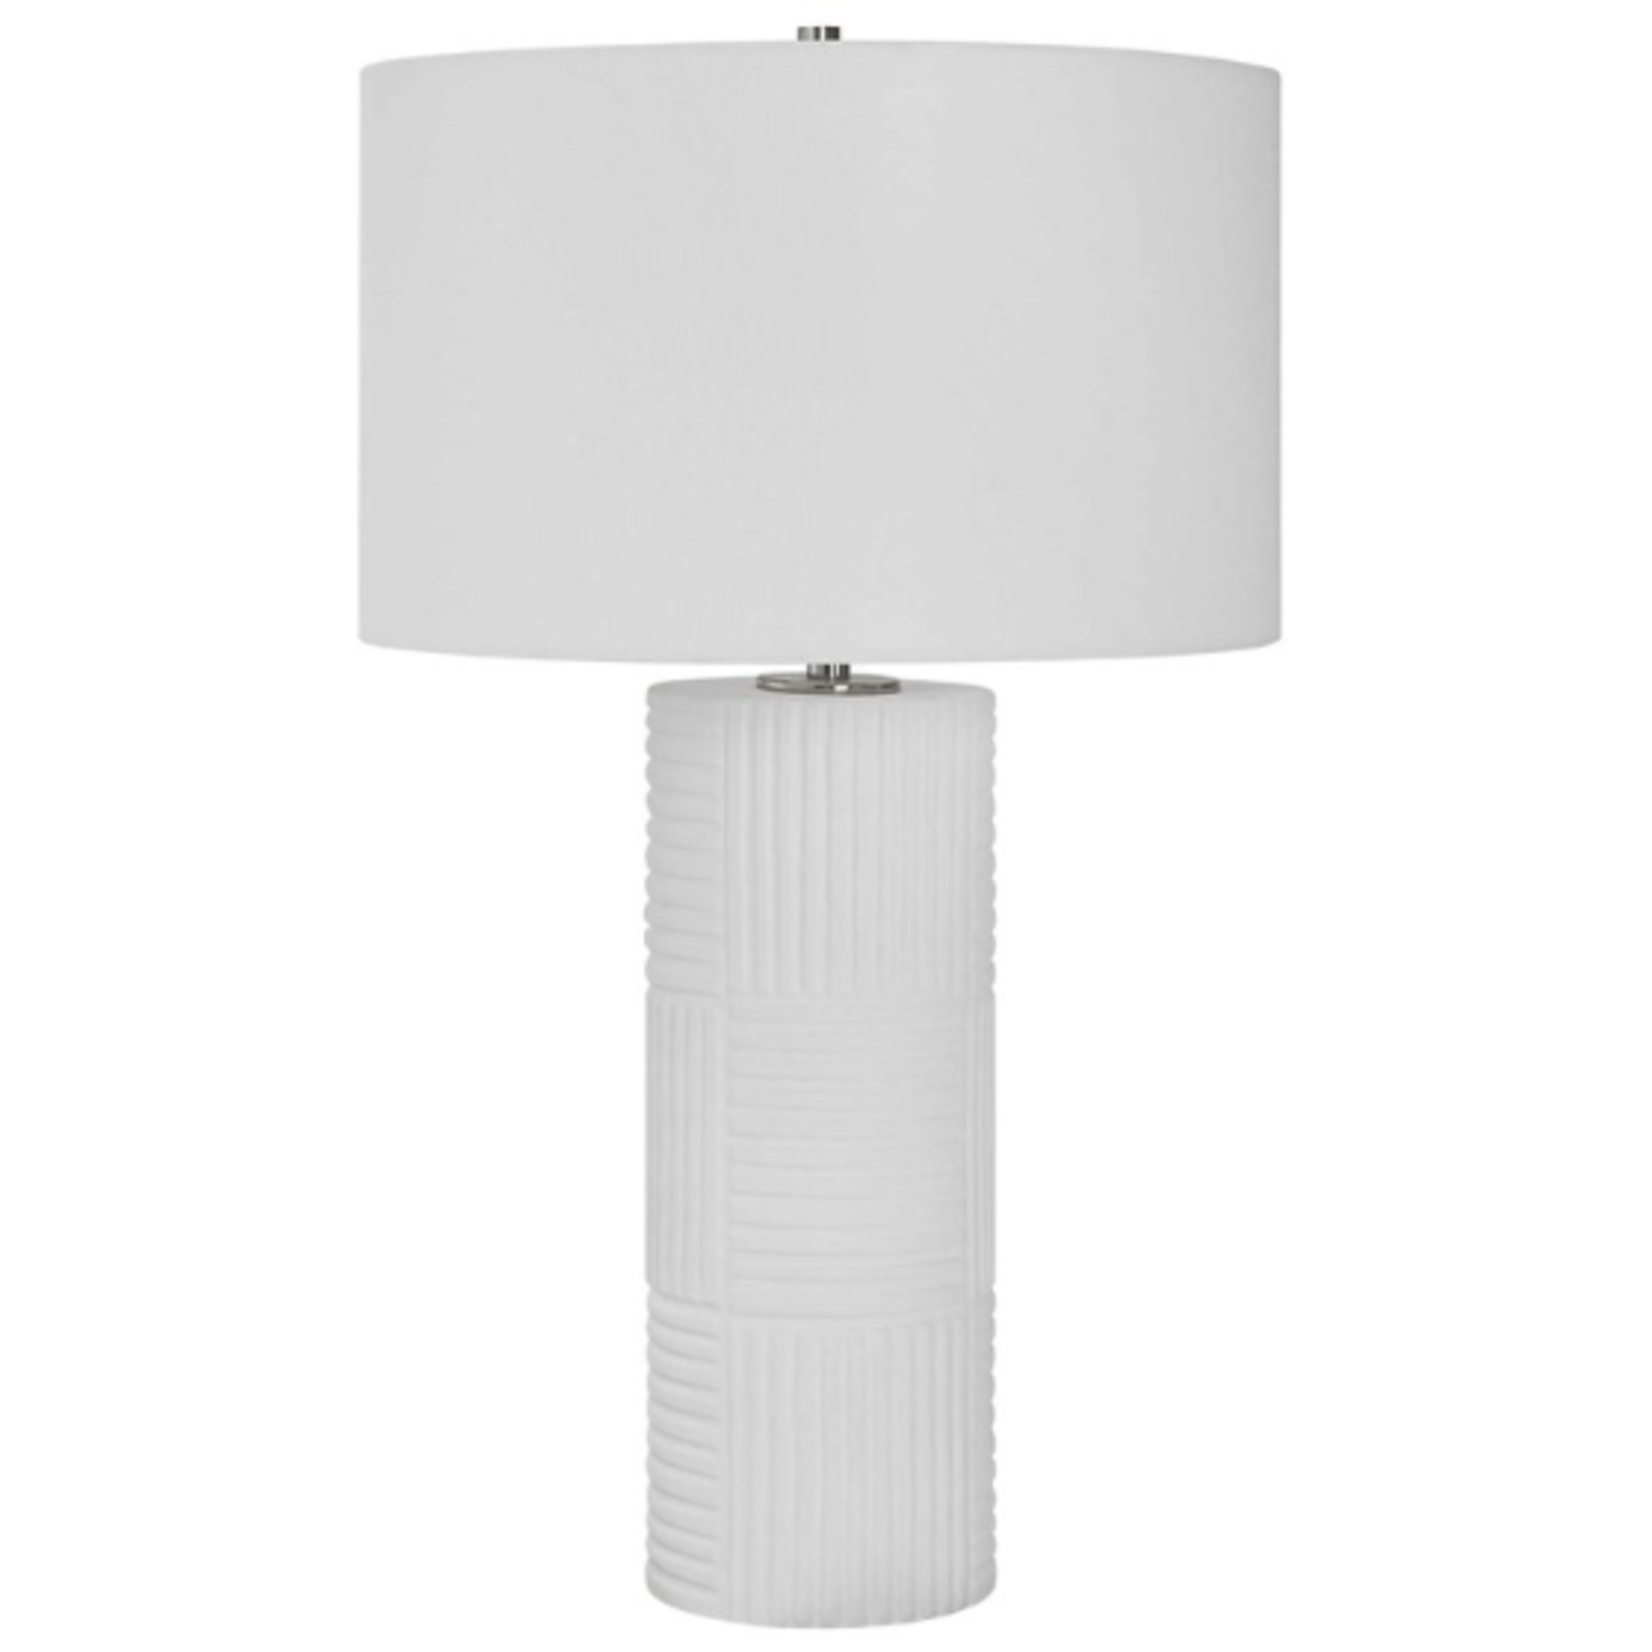 Outside The Box 28" Uttermost Patchwork White Ceramic Table Lamp